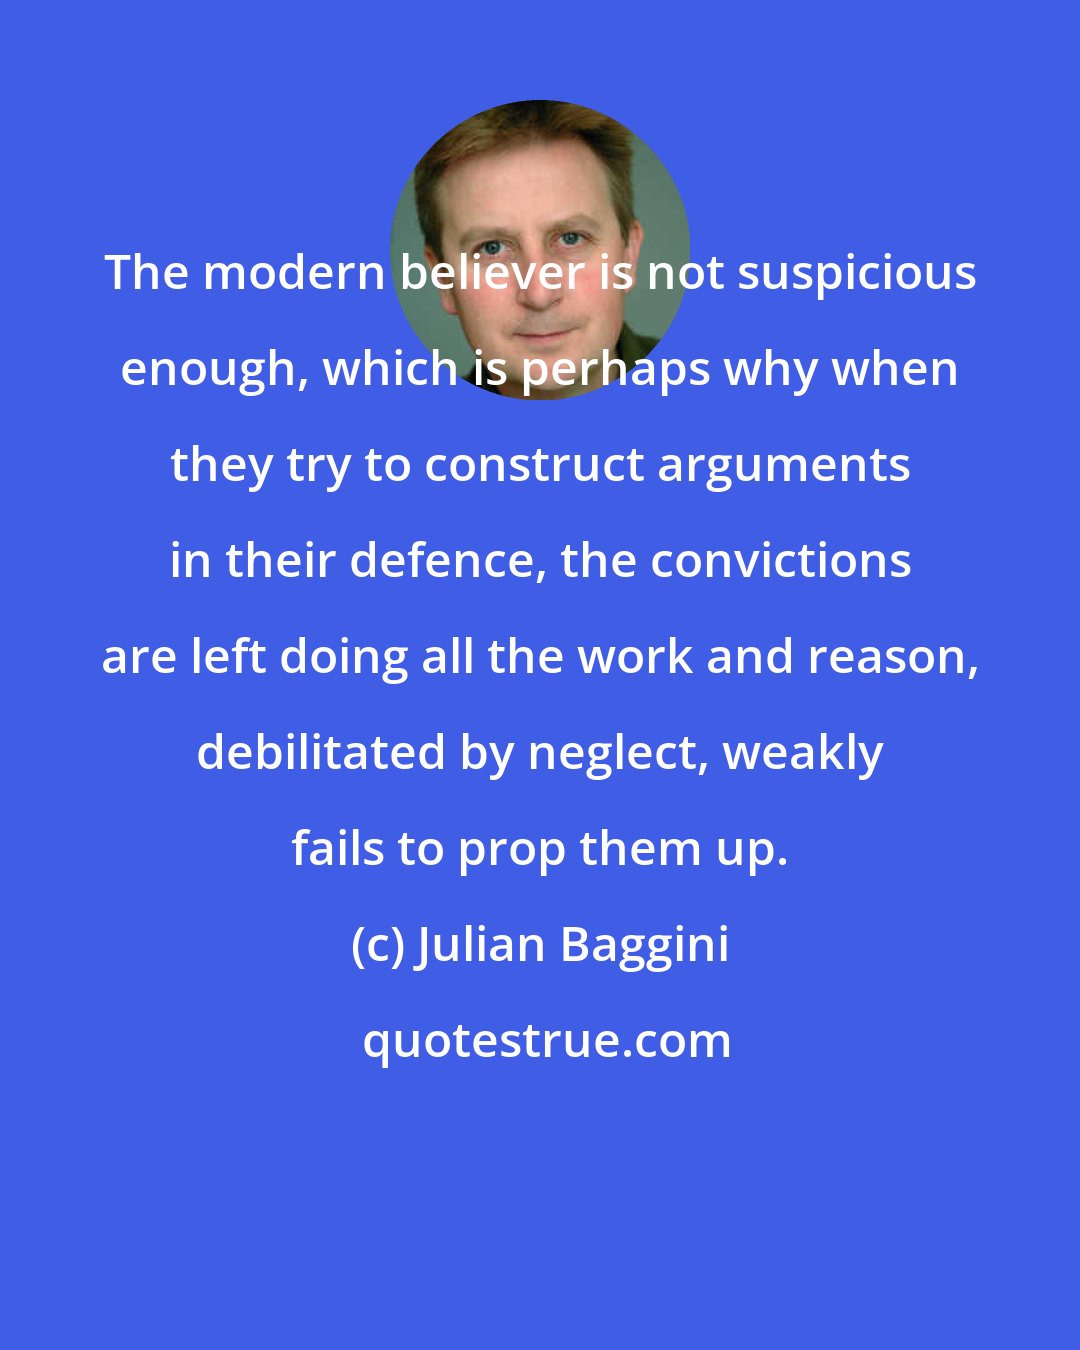 Julian Baggini: The modern believer is not suspicious enough, which is perhaps why when they try to construct arguments in their defence, the convictions are left doing all the work and reason, debilitated by neglect, weakly fails to prop them up.